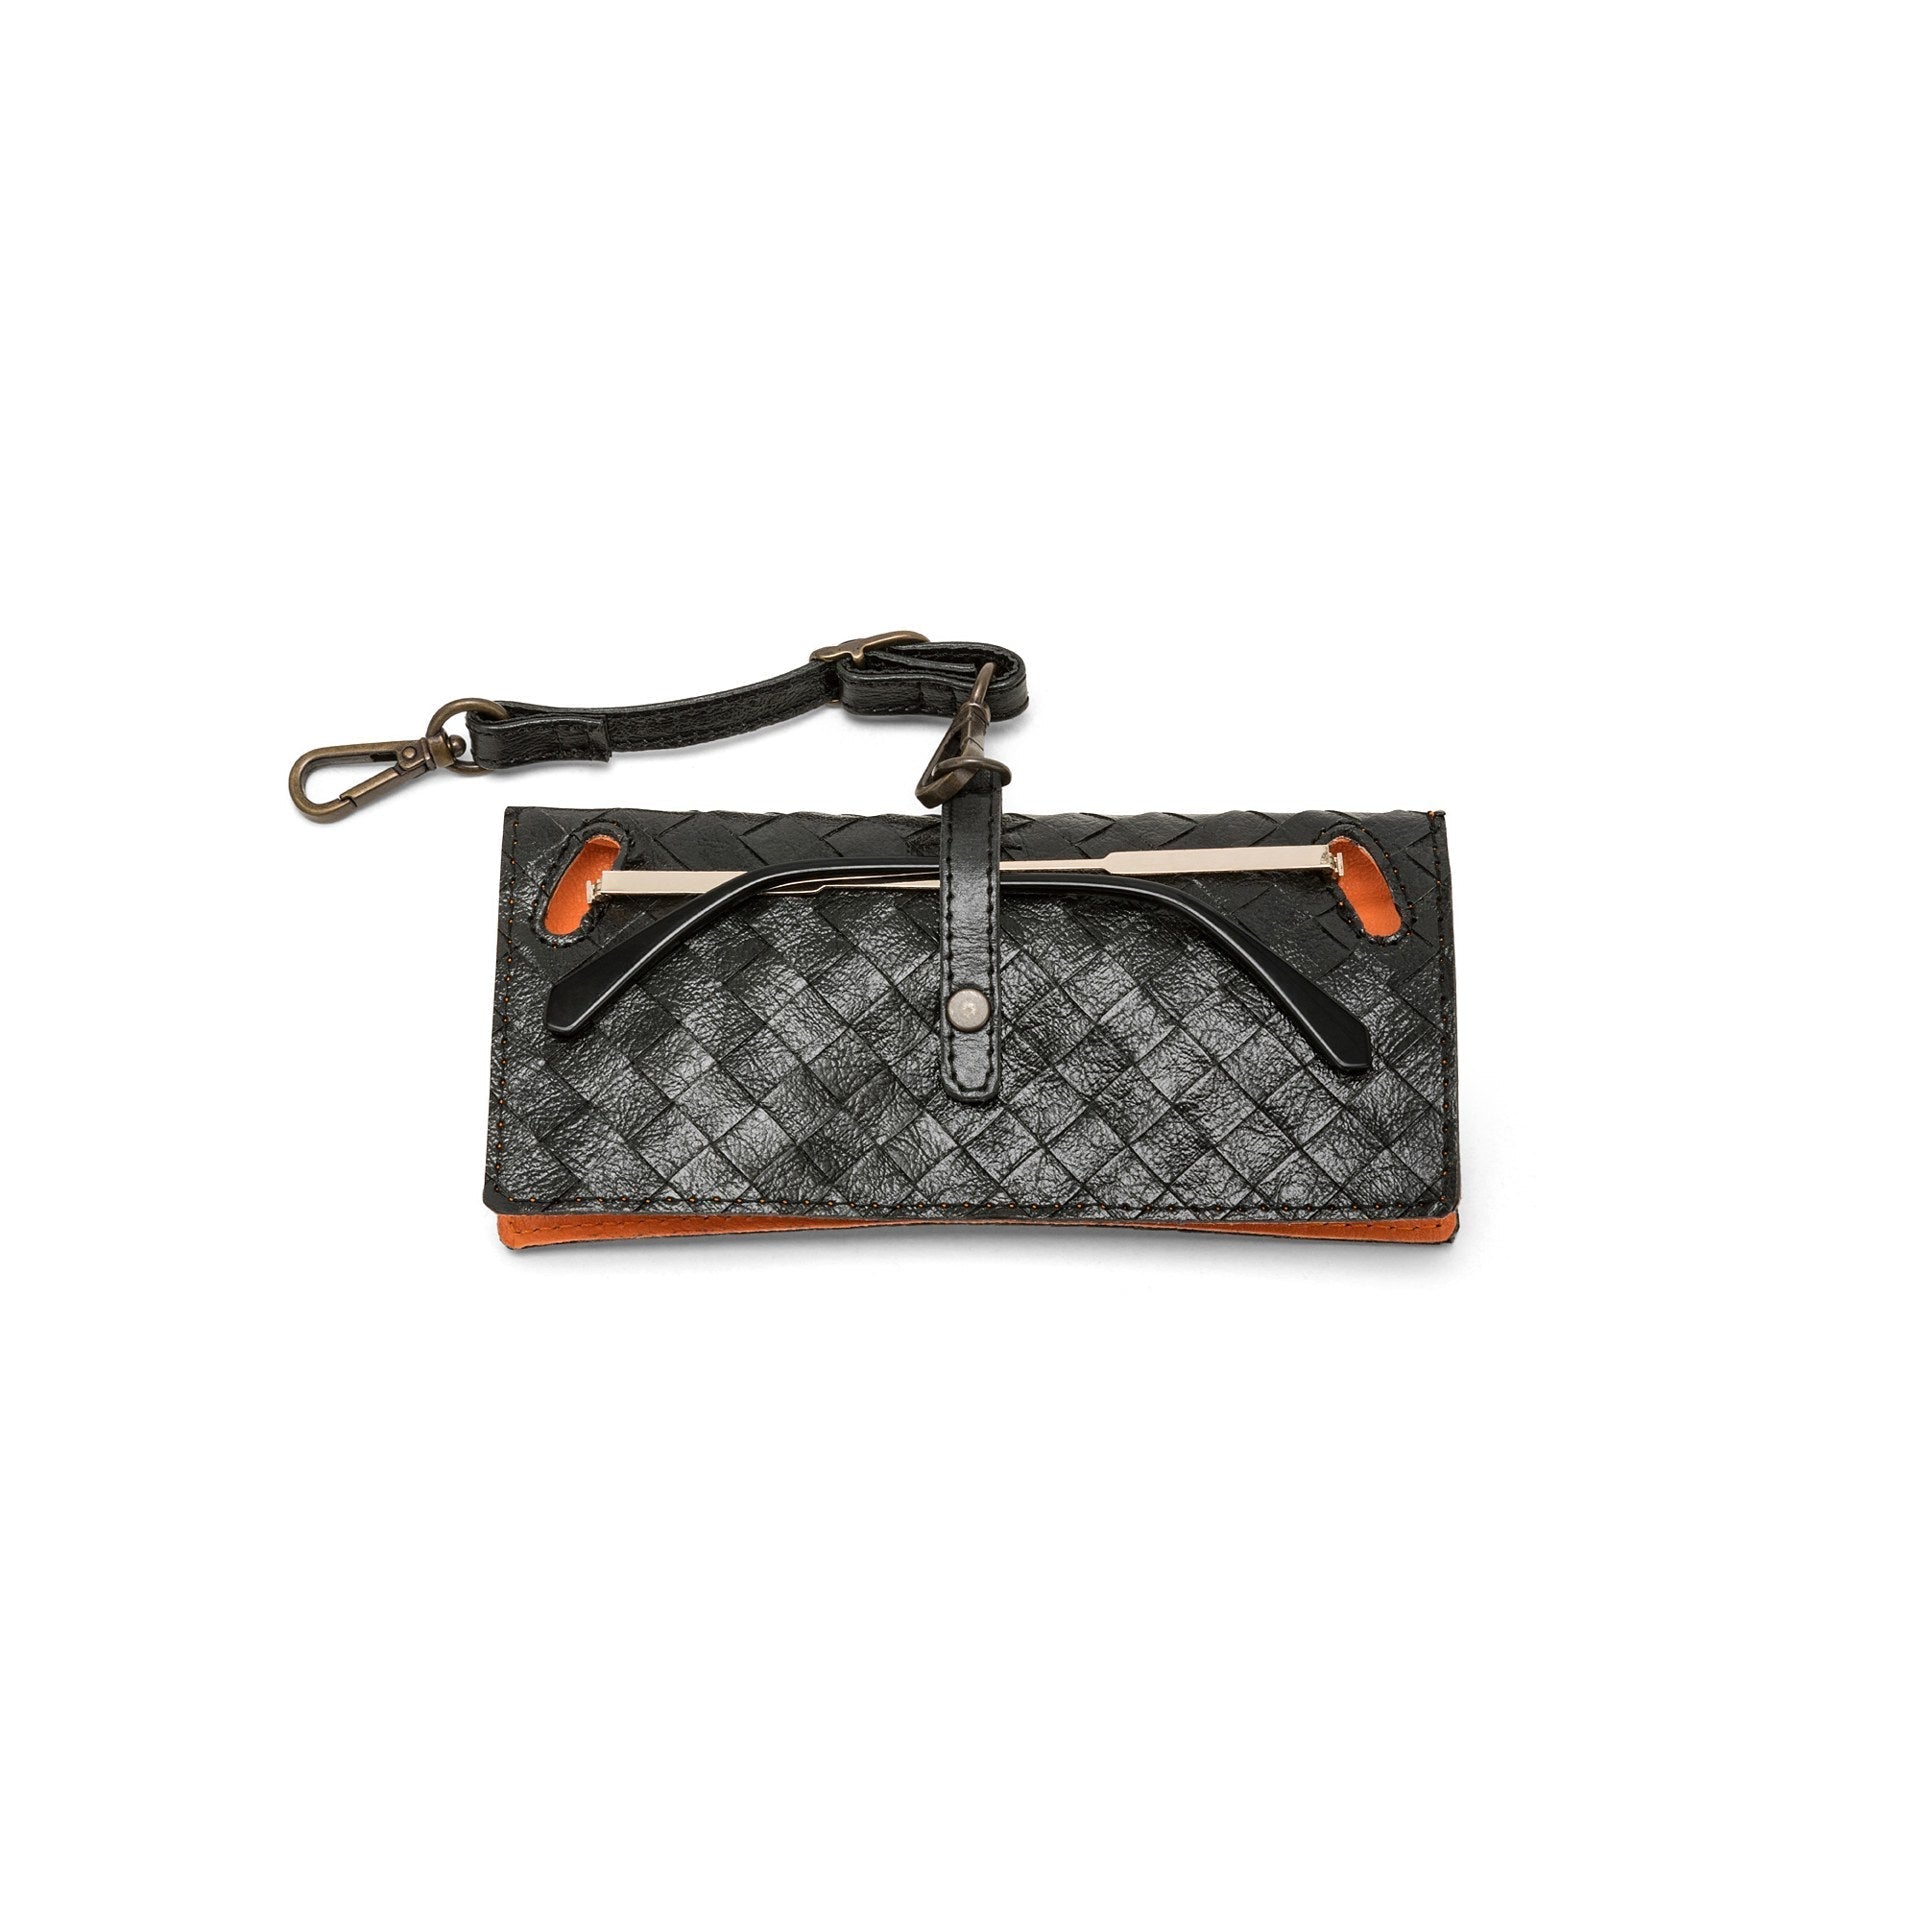 A black woven washable paper glasses case is shown from the rear angle, with a metal stud closure and a washable paper strap attachment.